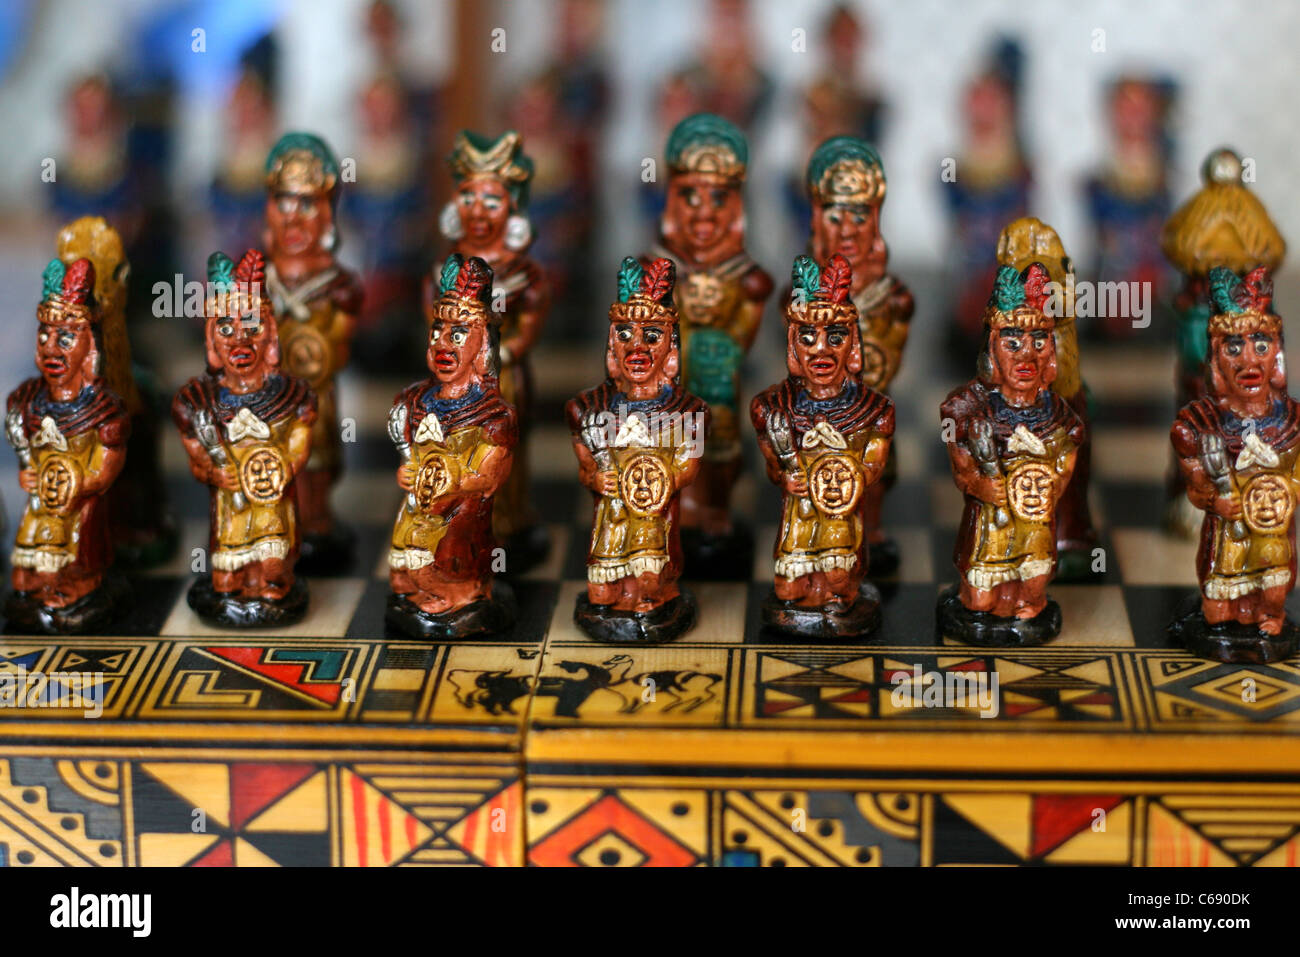 Detail of chess set pieces in the Inca markets. Miraflores, Lima, Peru, South America Stock Photo